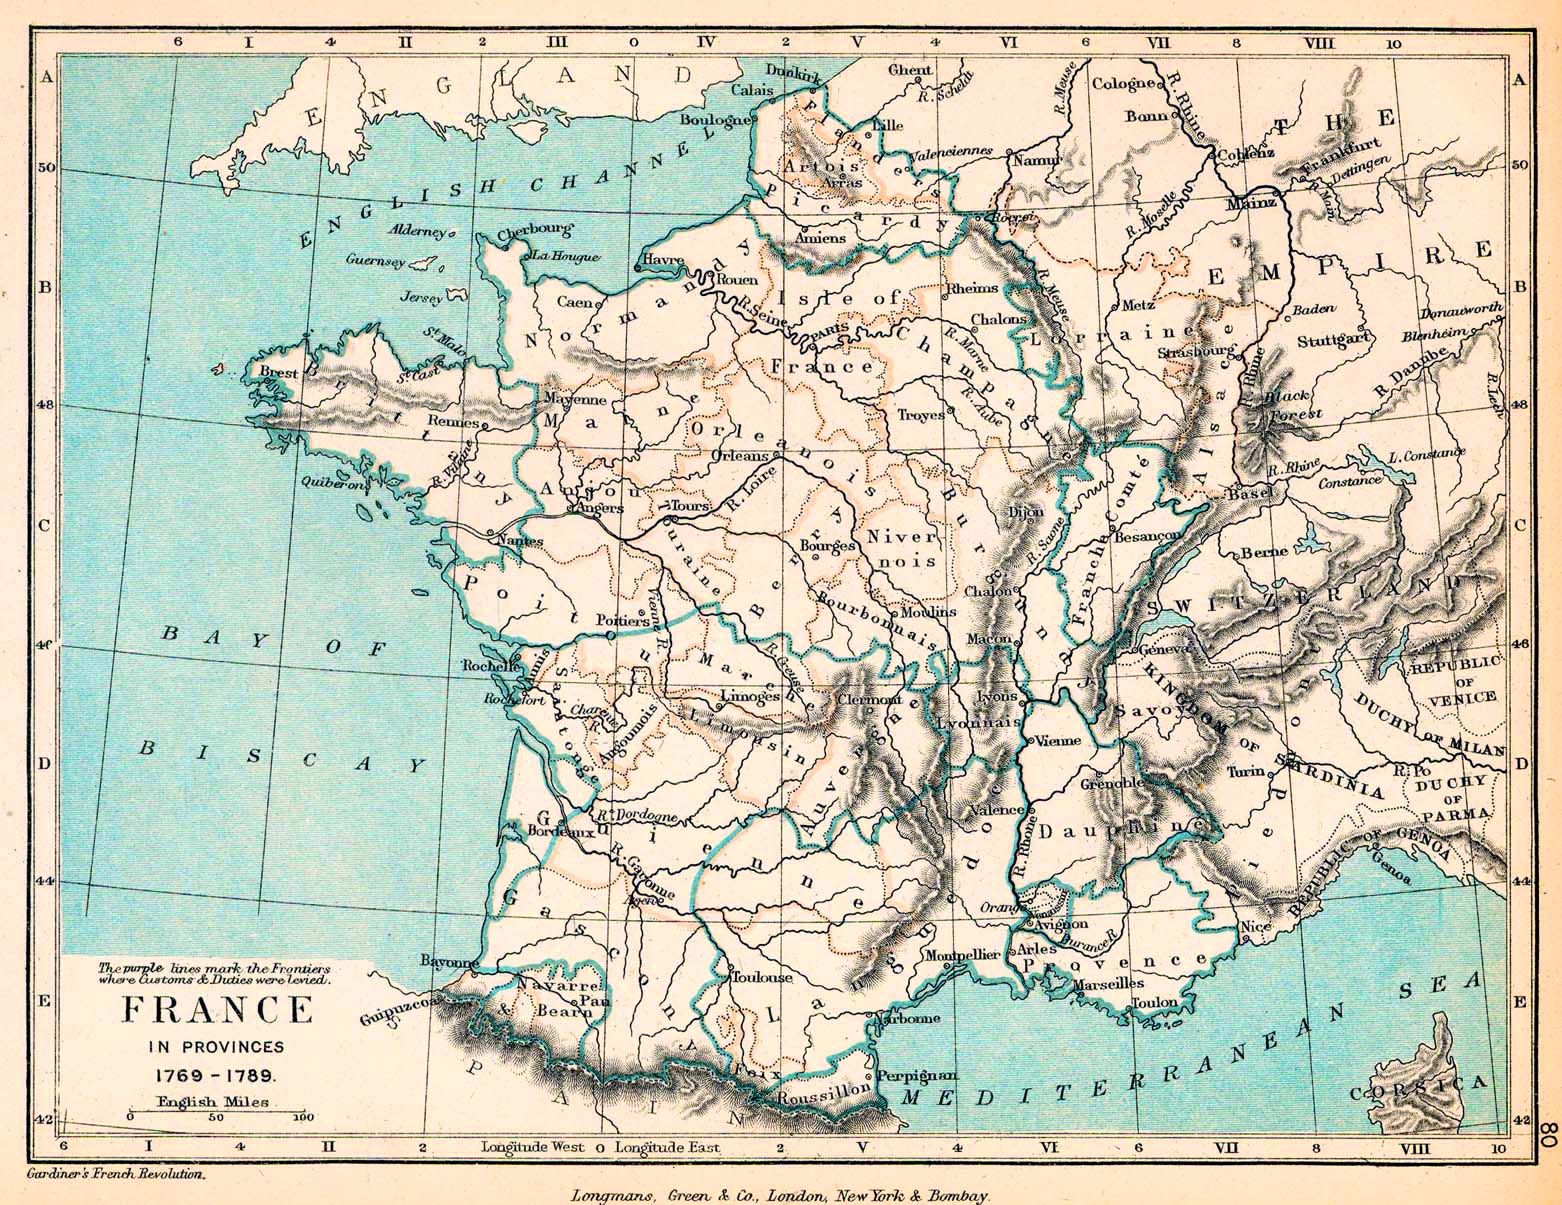 Map of France in Provinces, showing the Customs Frontiers, 1769 - 1789